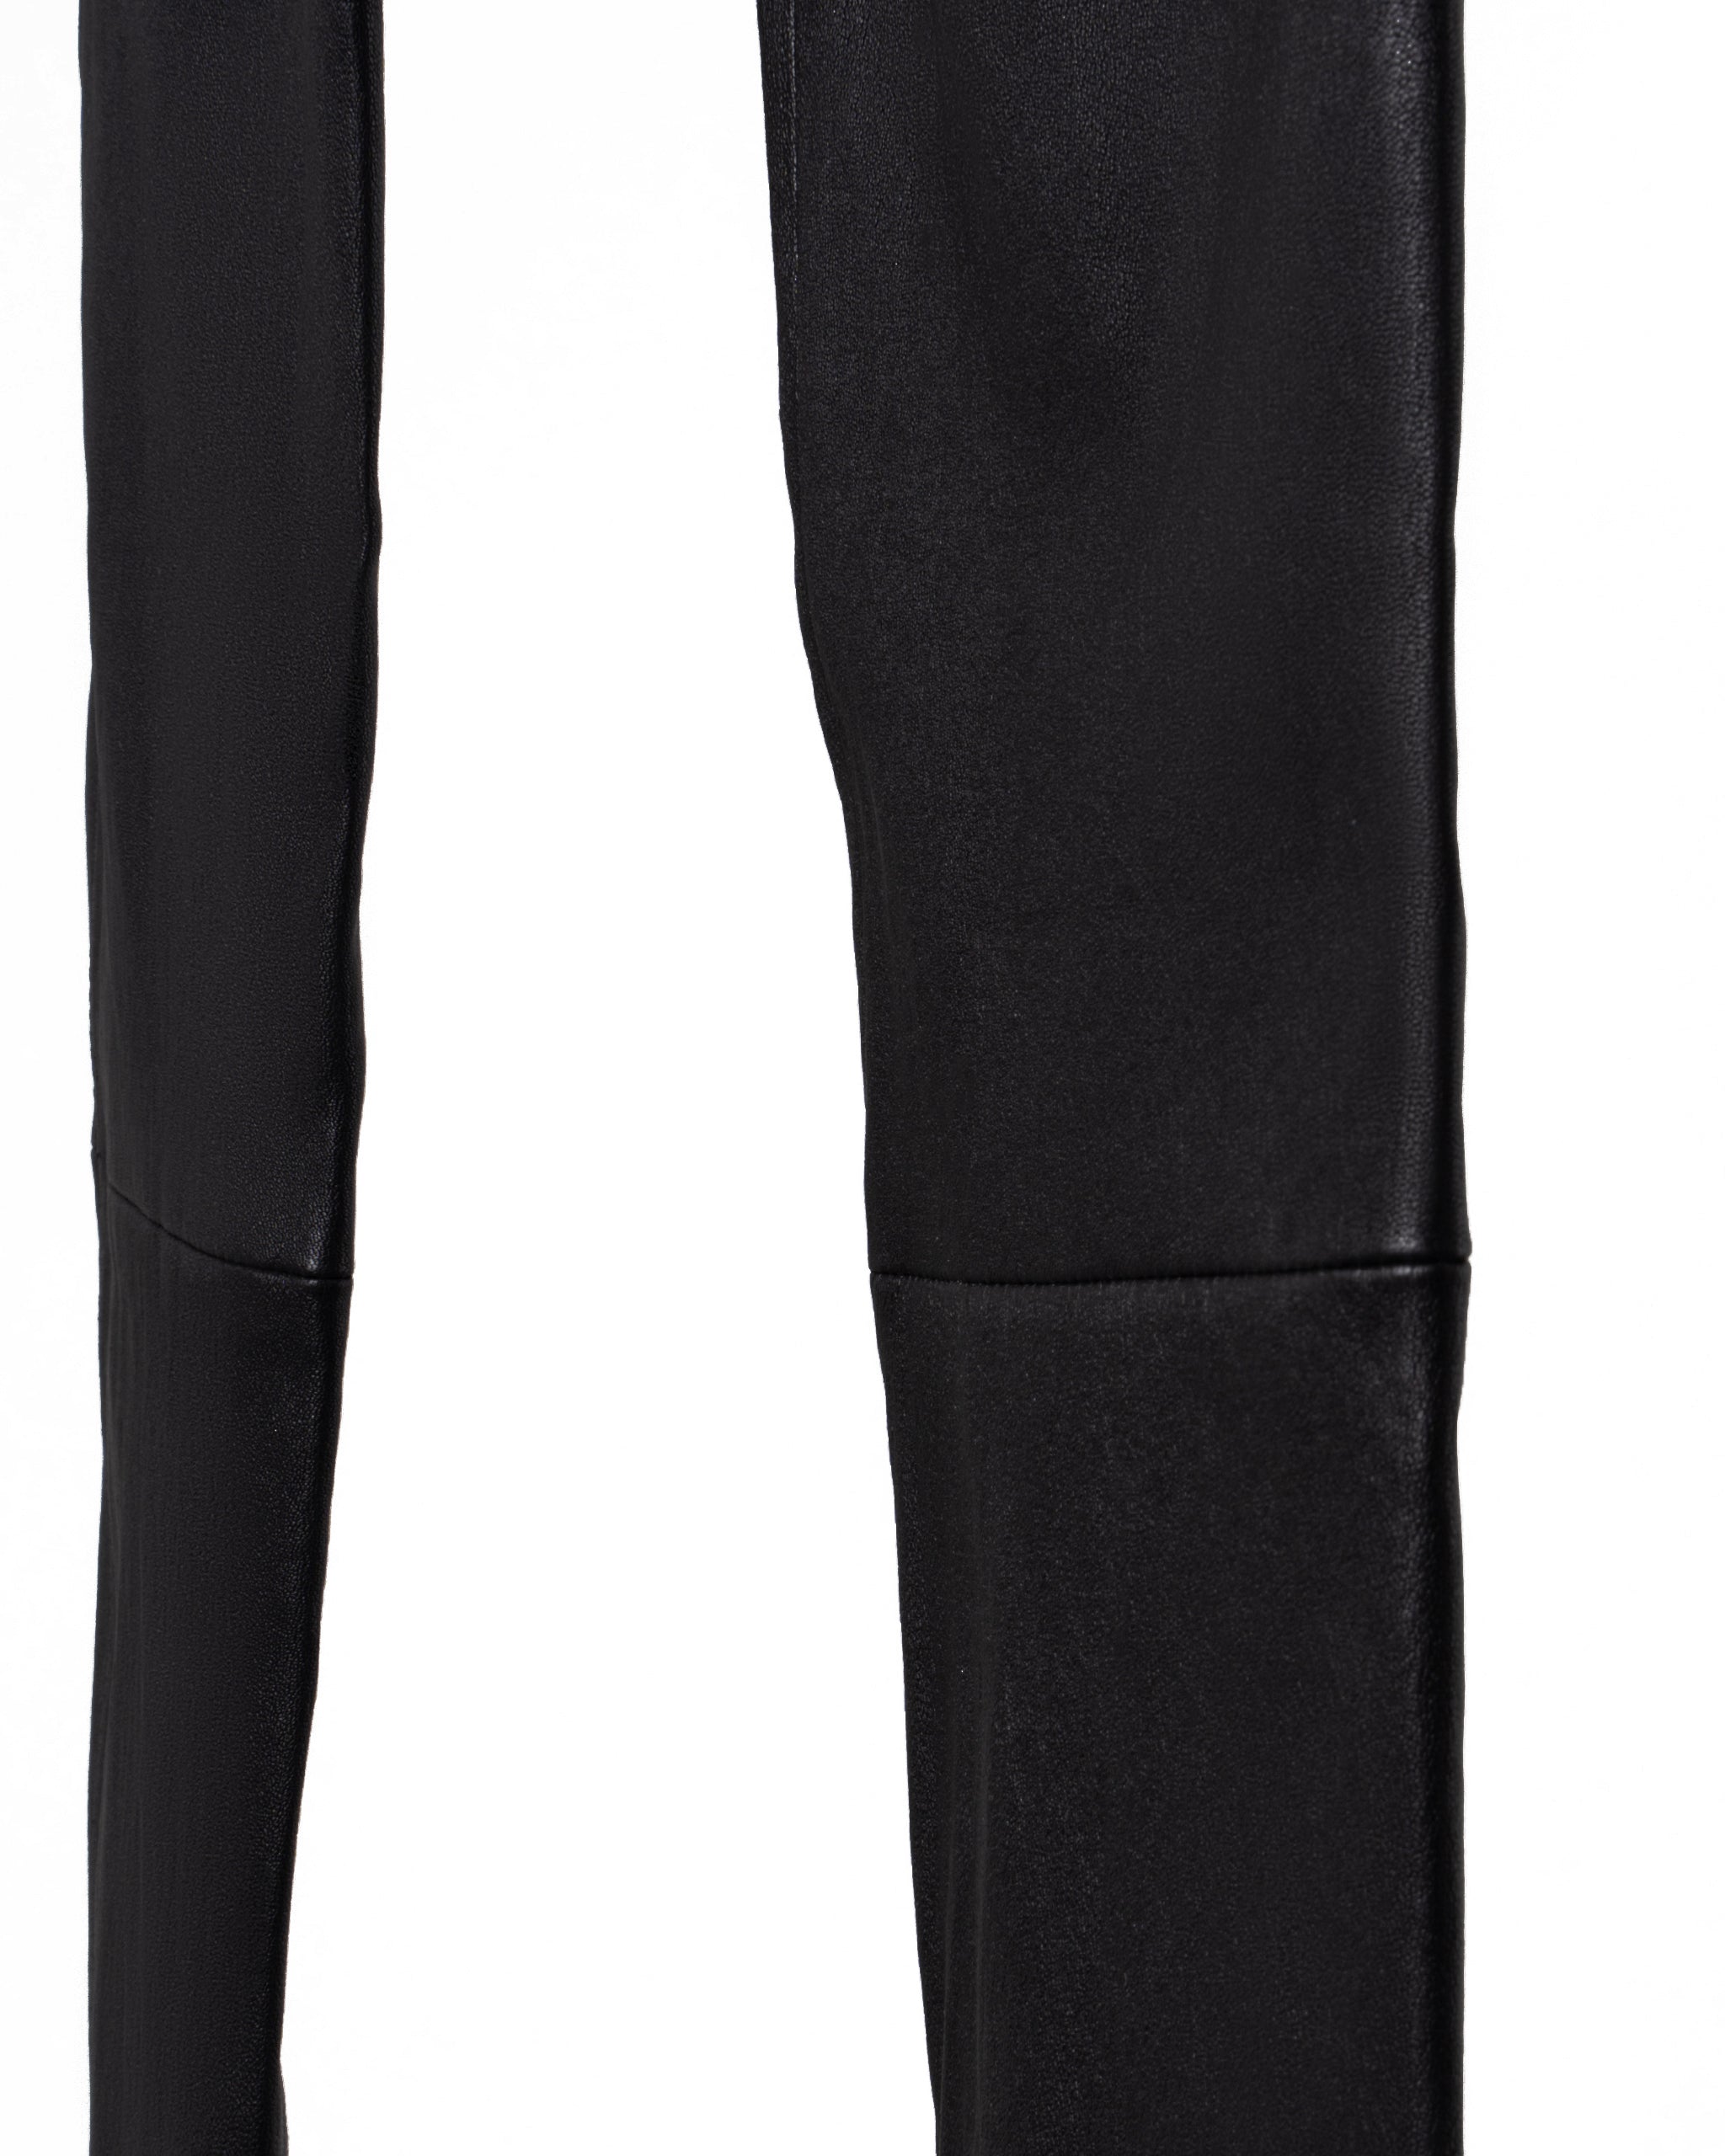 PLONGEE STRETCH LEATHER PANTS